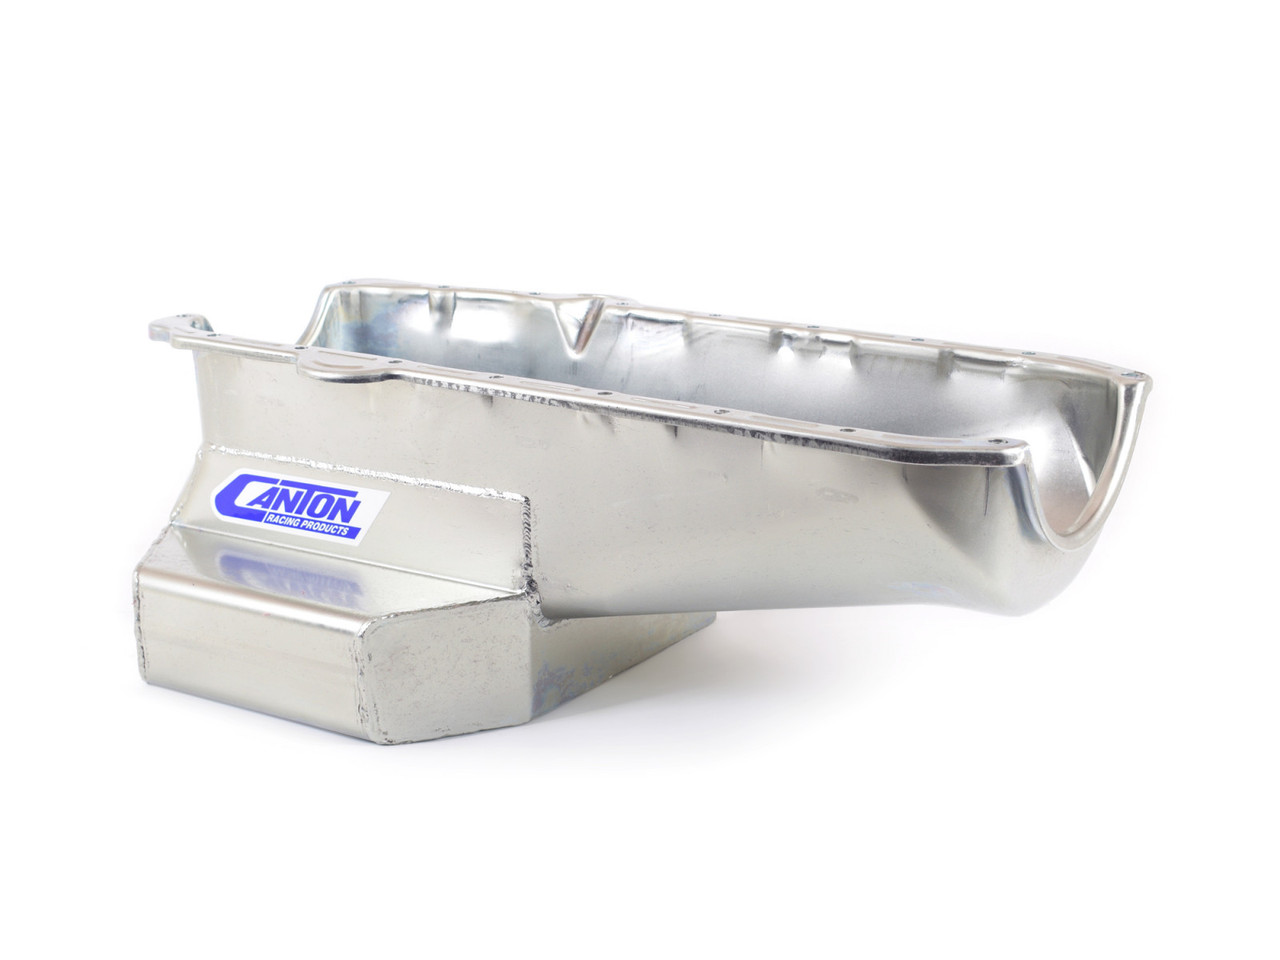 Canton 15-250 Oil Pan For Pre-1980 Small Block Chevy G Body Road Race Pan (CRP-15-250)